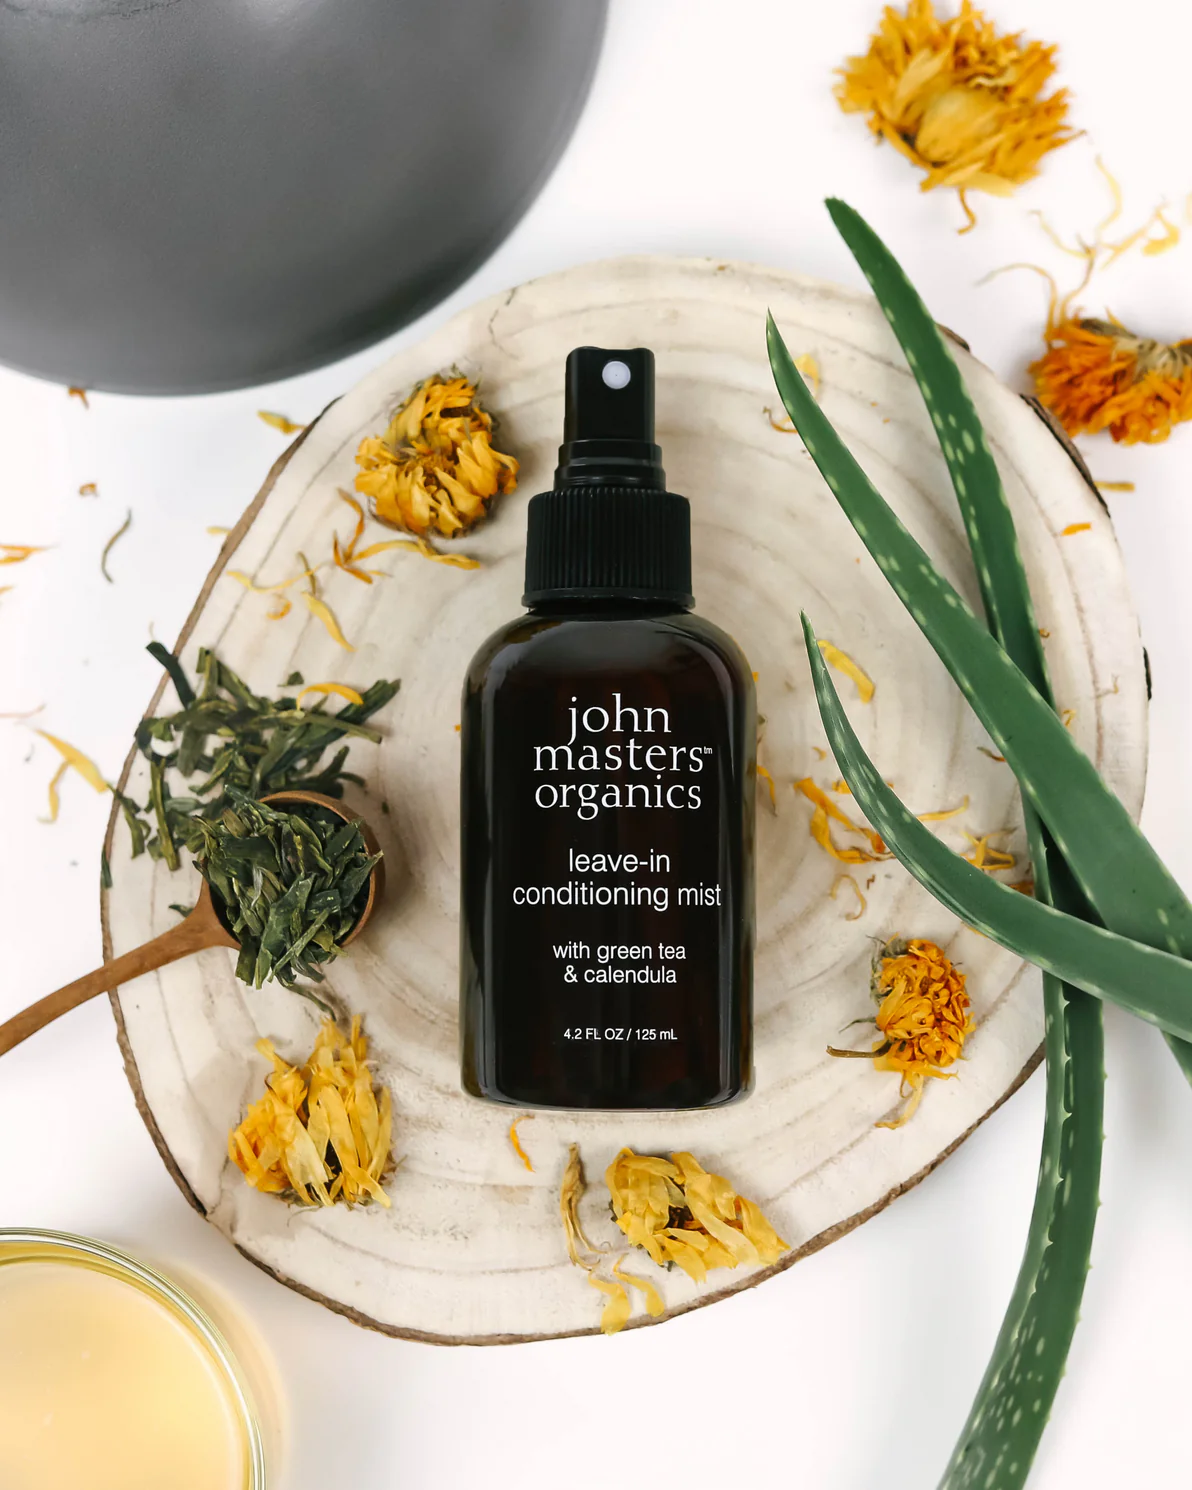 John Masters Organics Leave-in Conditioning Mist with Green Tea & Calendula review and promo code